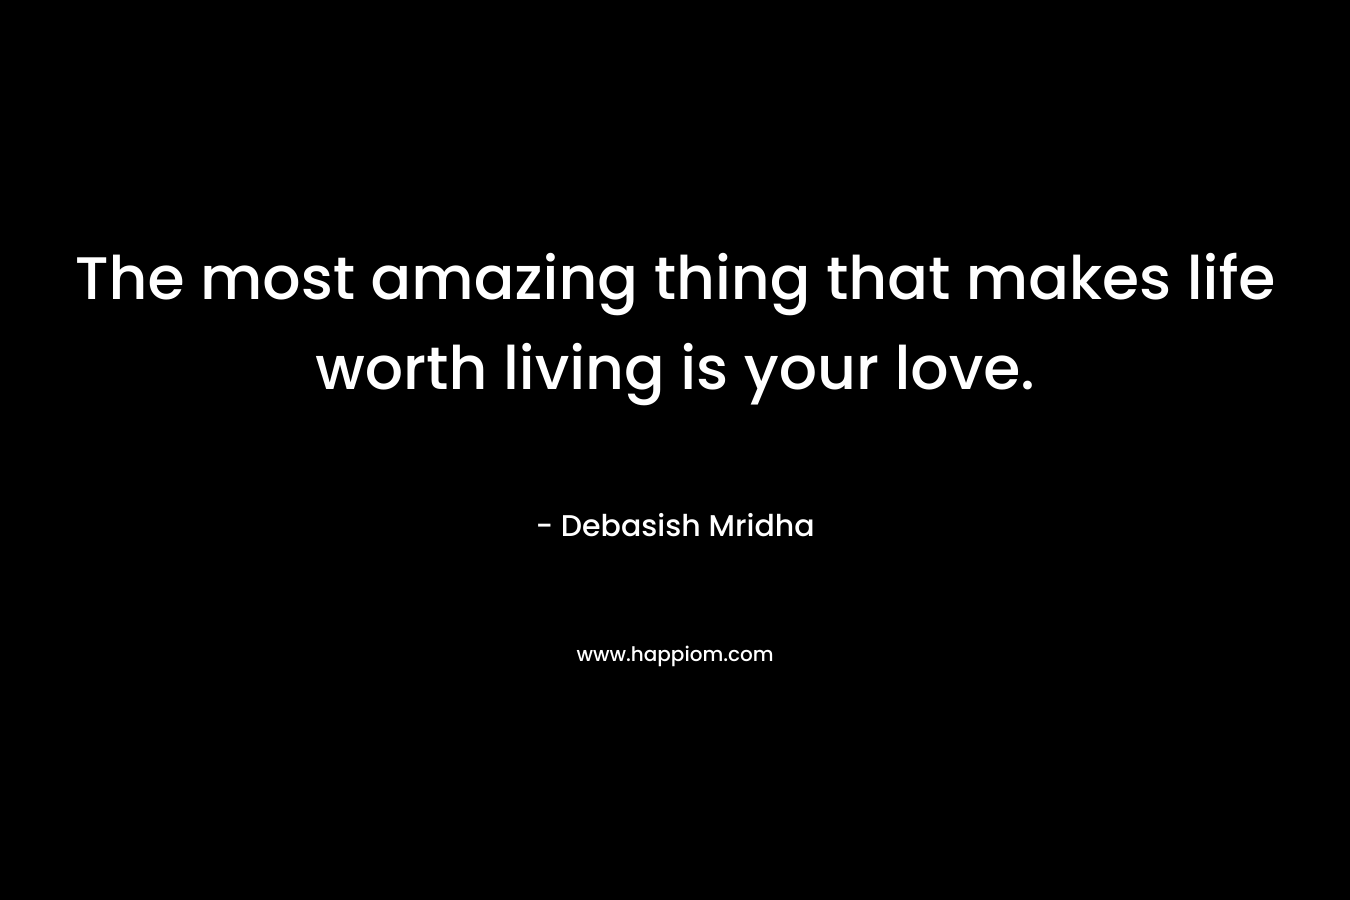 The most amazing thing that makes life worth living is your love.